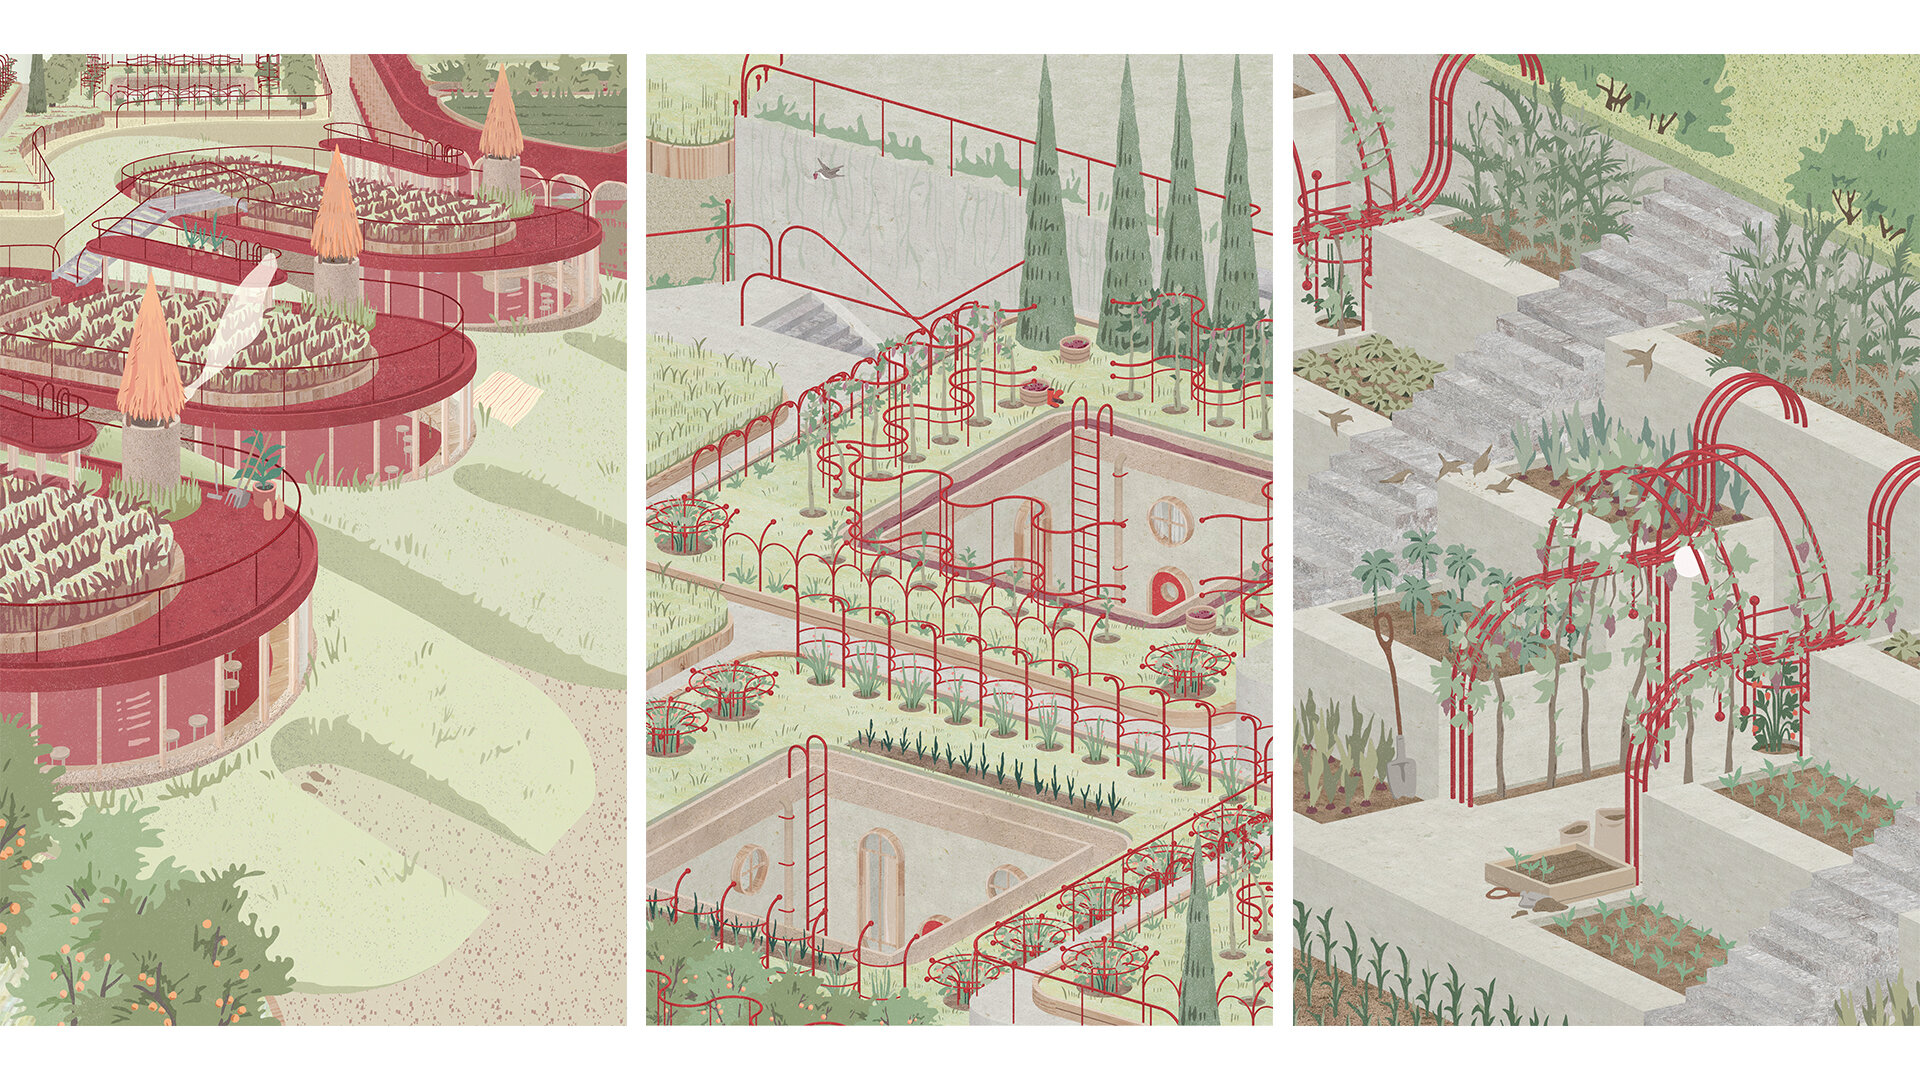 Productive Landscape - Regent’s Park Food Community_Meiying Hong_MArch Year 5, Bartlett School of Architecture, UCL 8.jpg